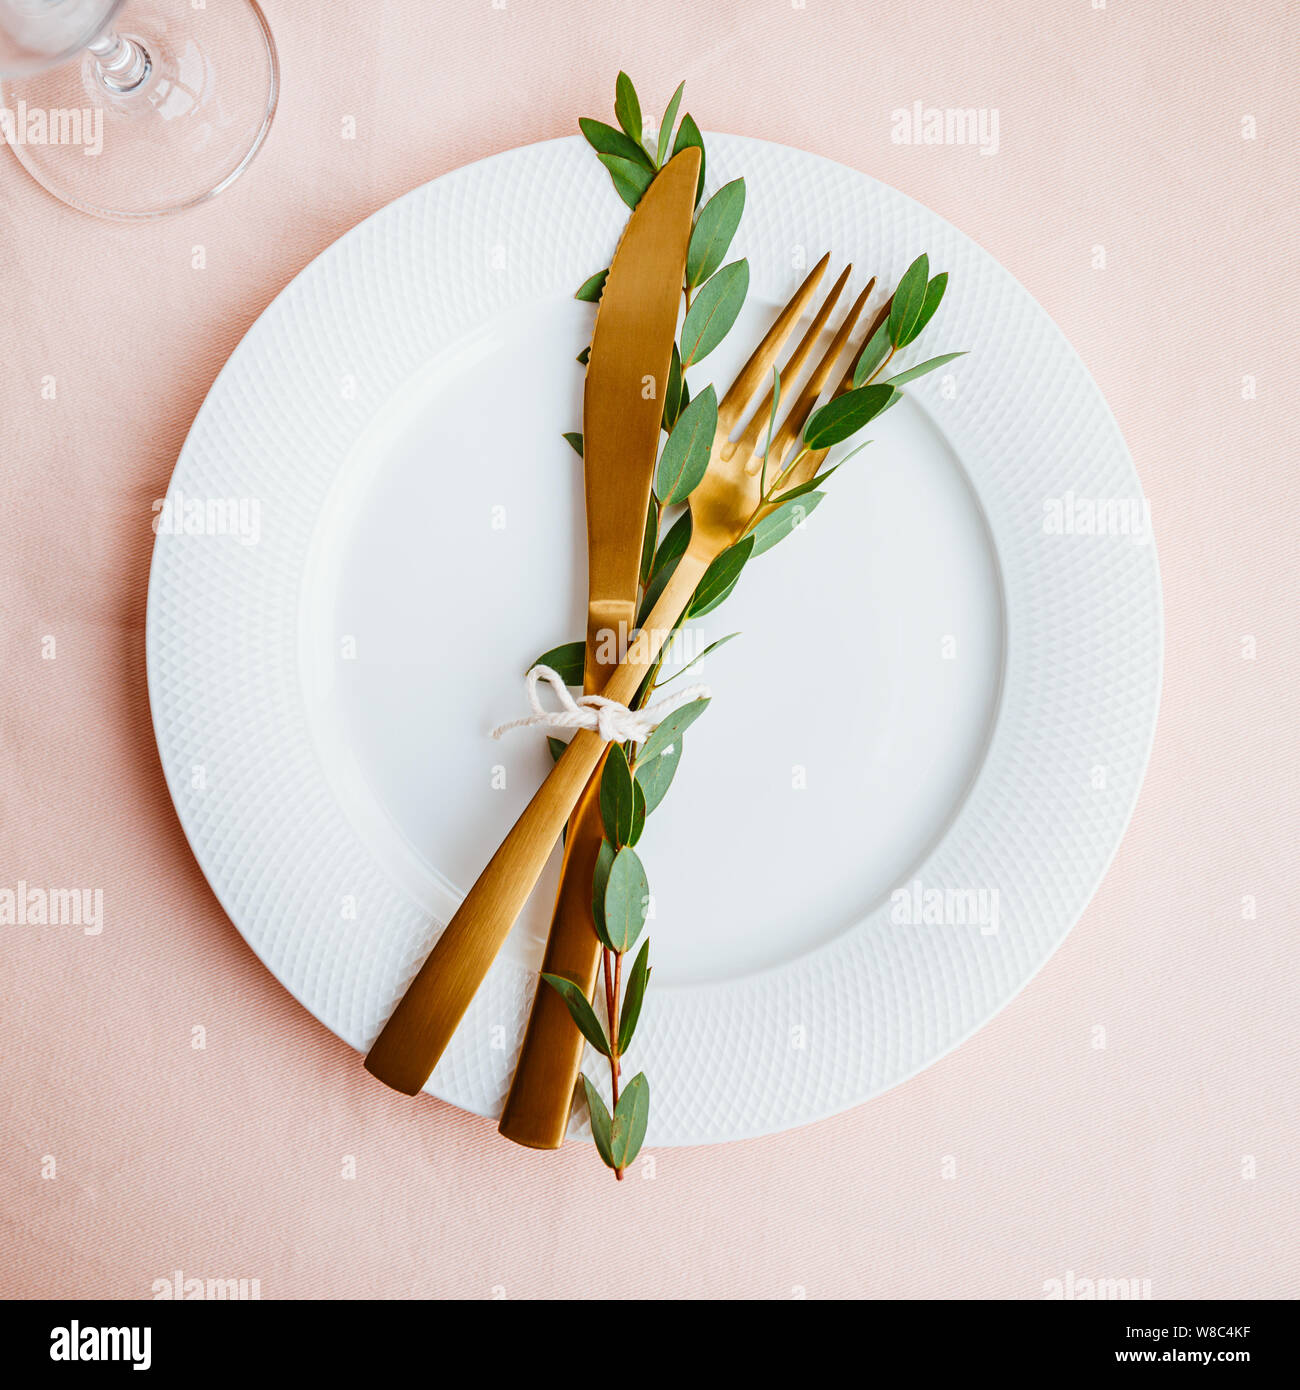 Festive table setting for celebrate event with decorated golden cutlery on a white table. Top view, flat lay. Stock Photo